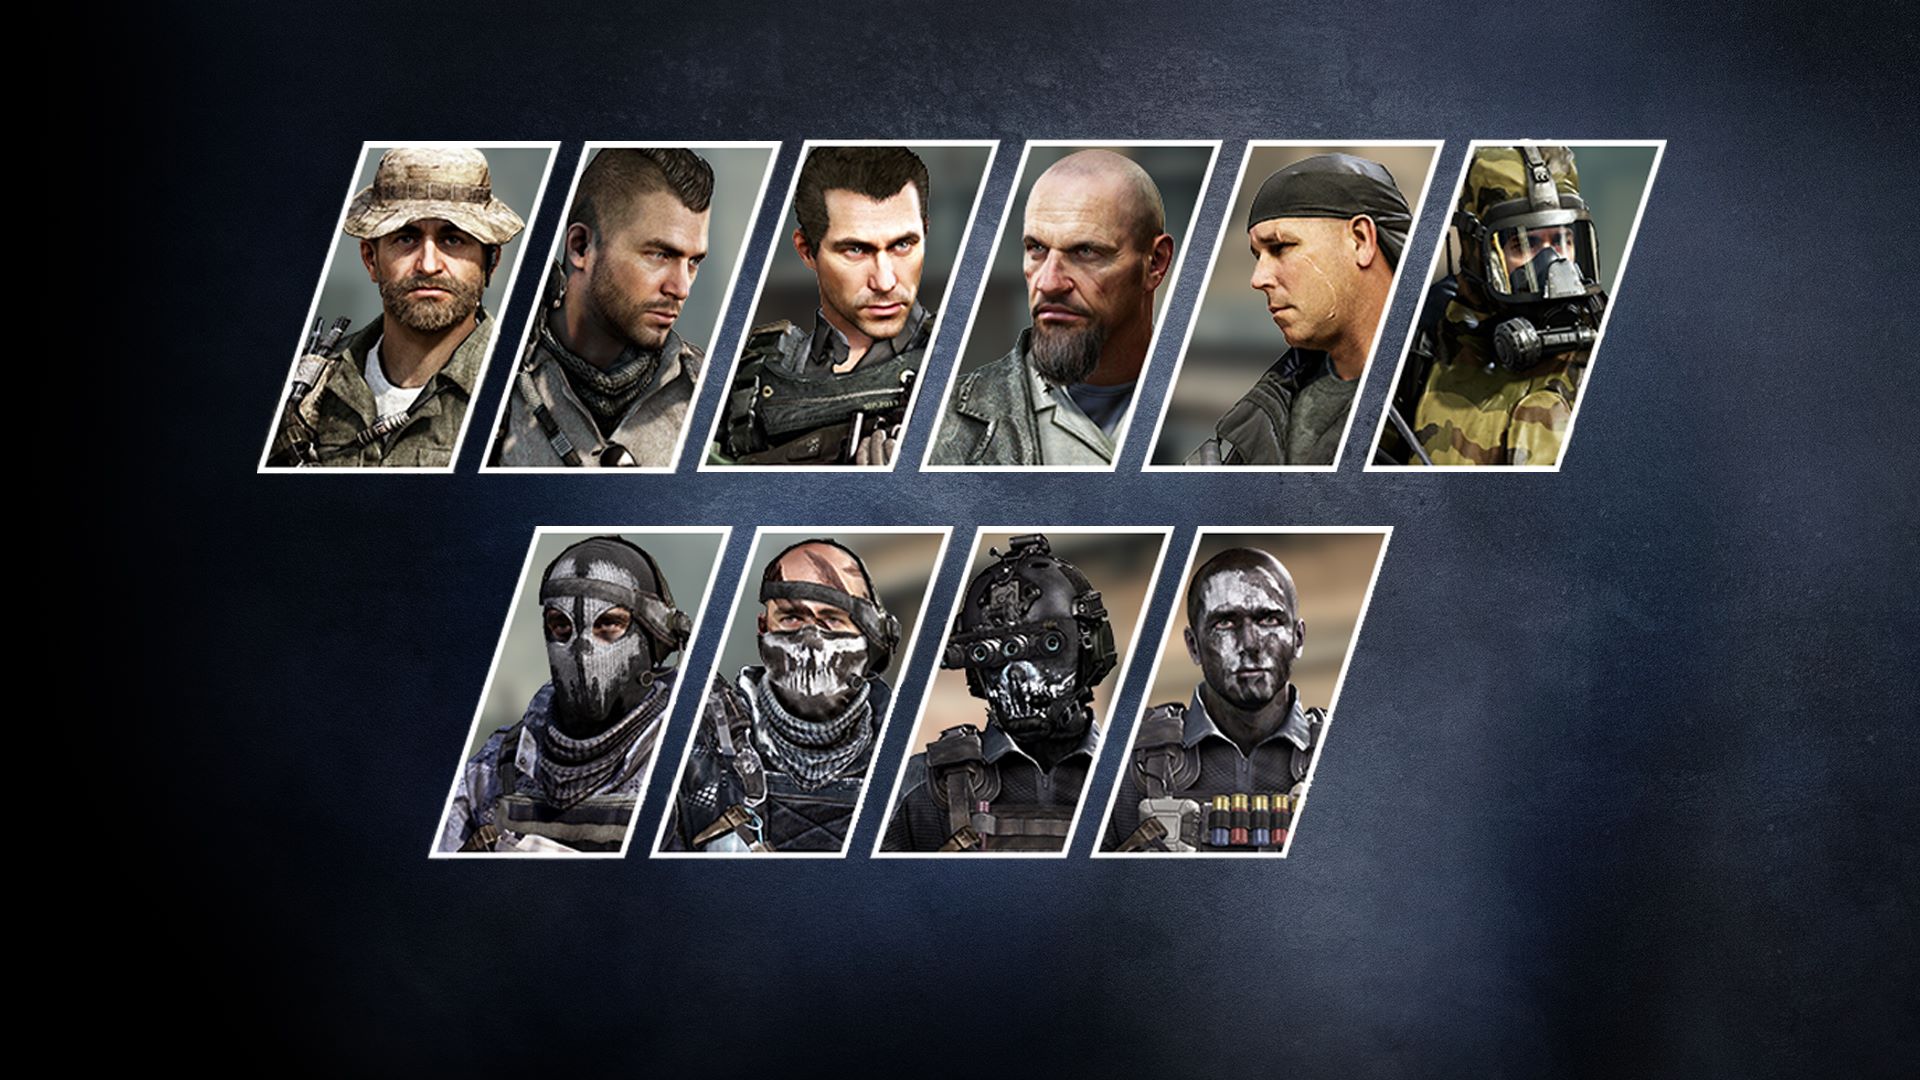 Call of Duty®: Ghosts Special Characters Bundle